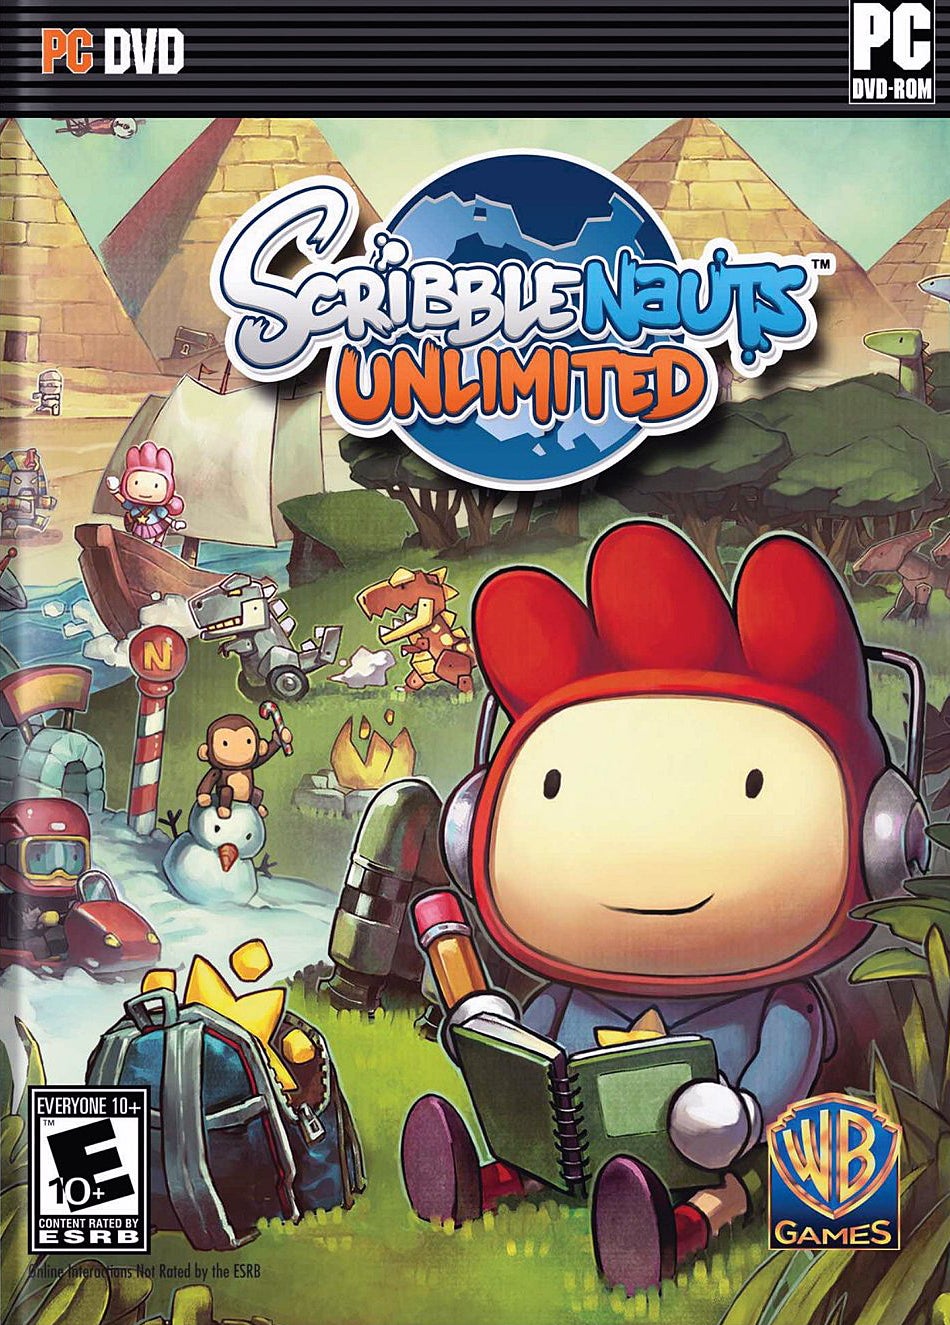 play scribblenauts free on computer